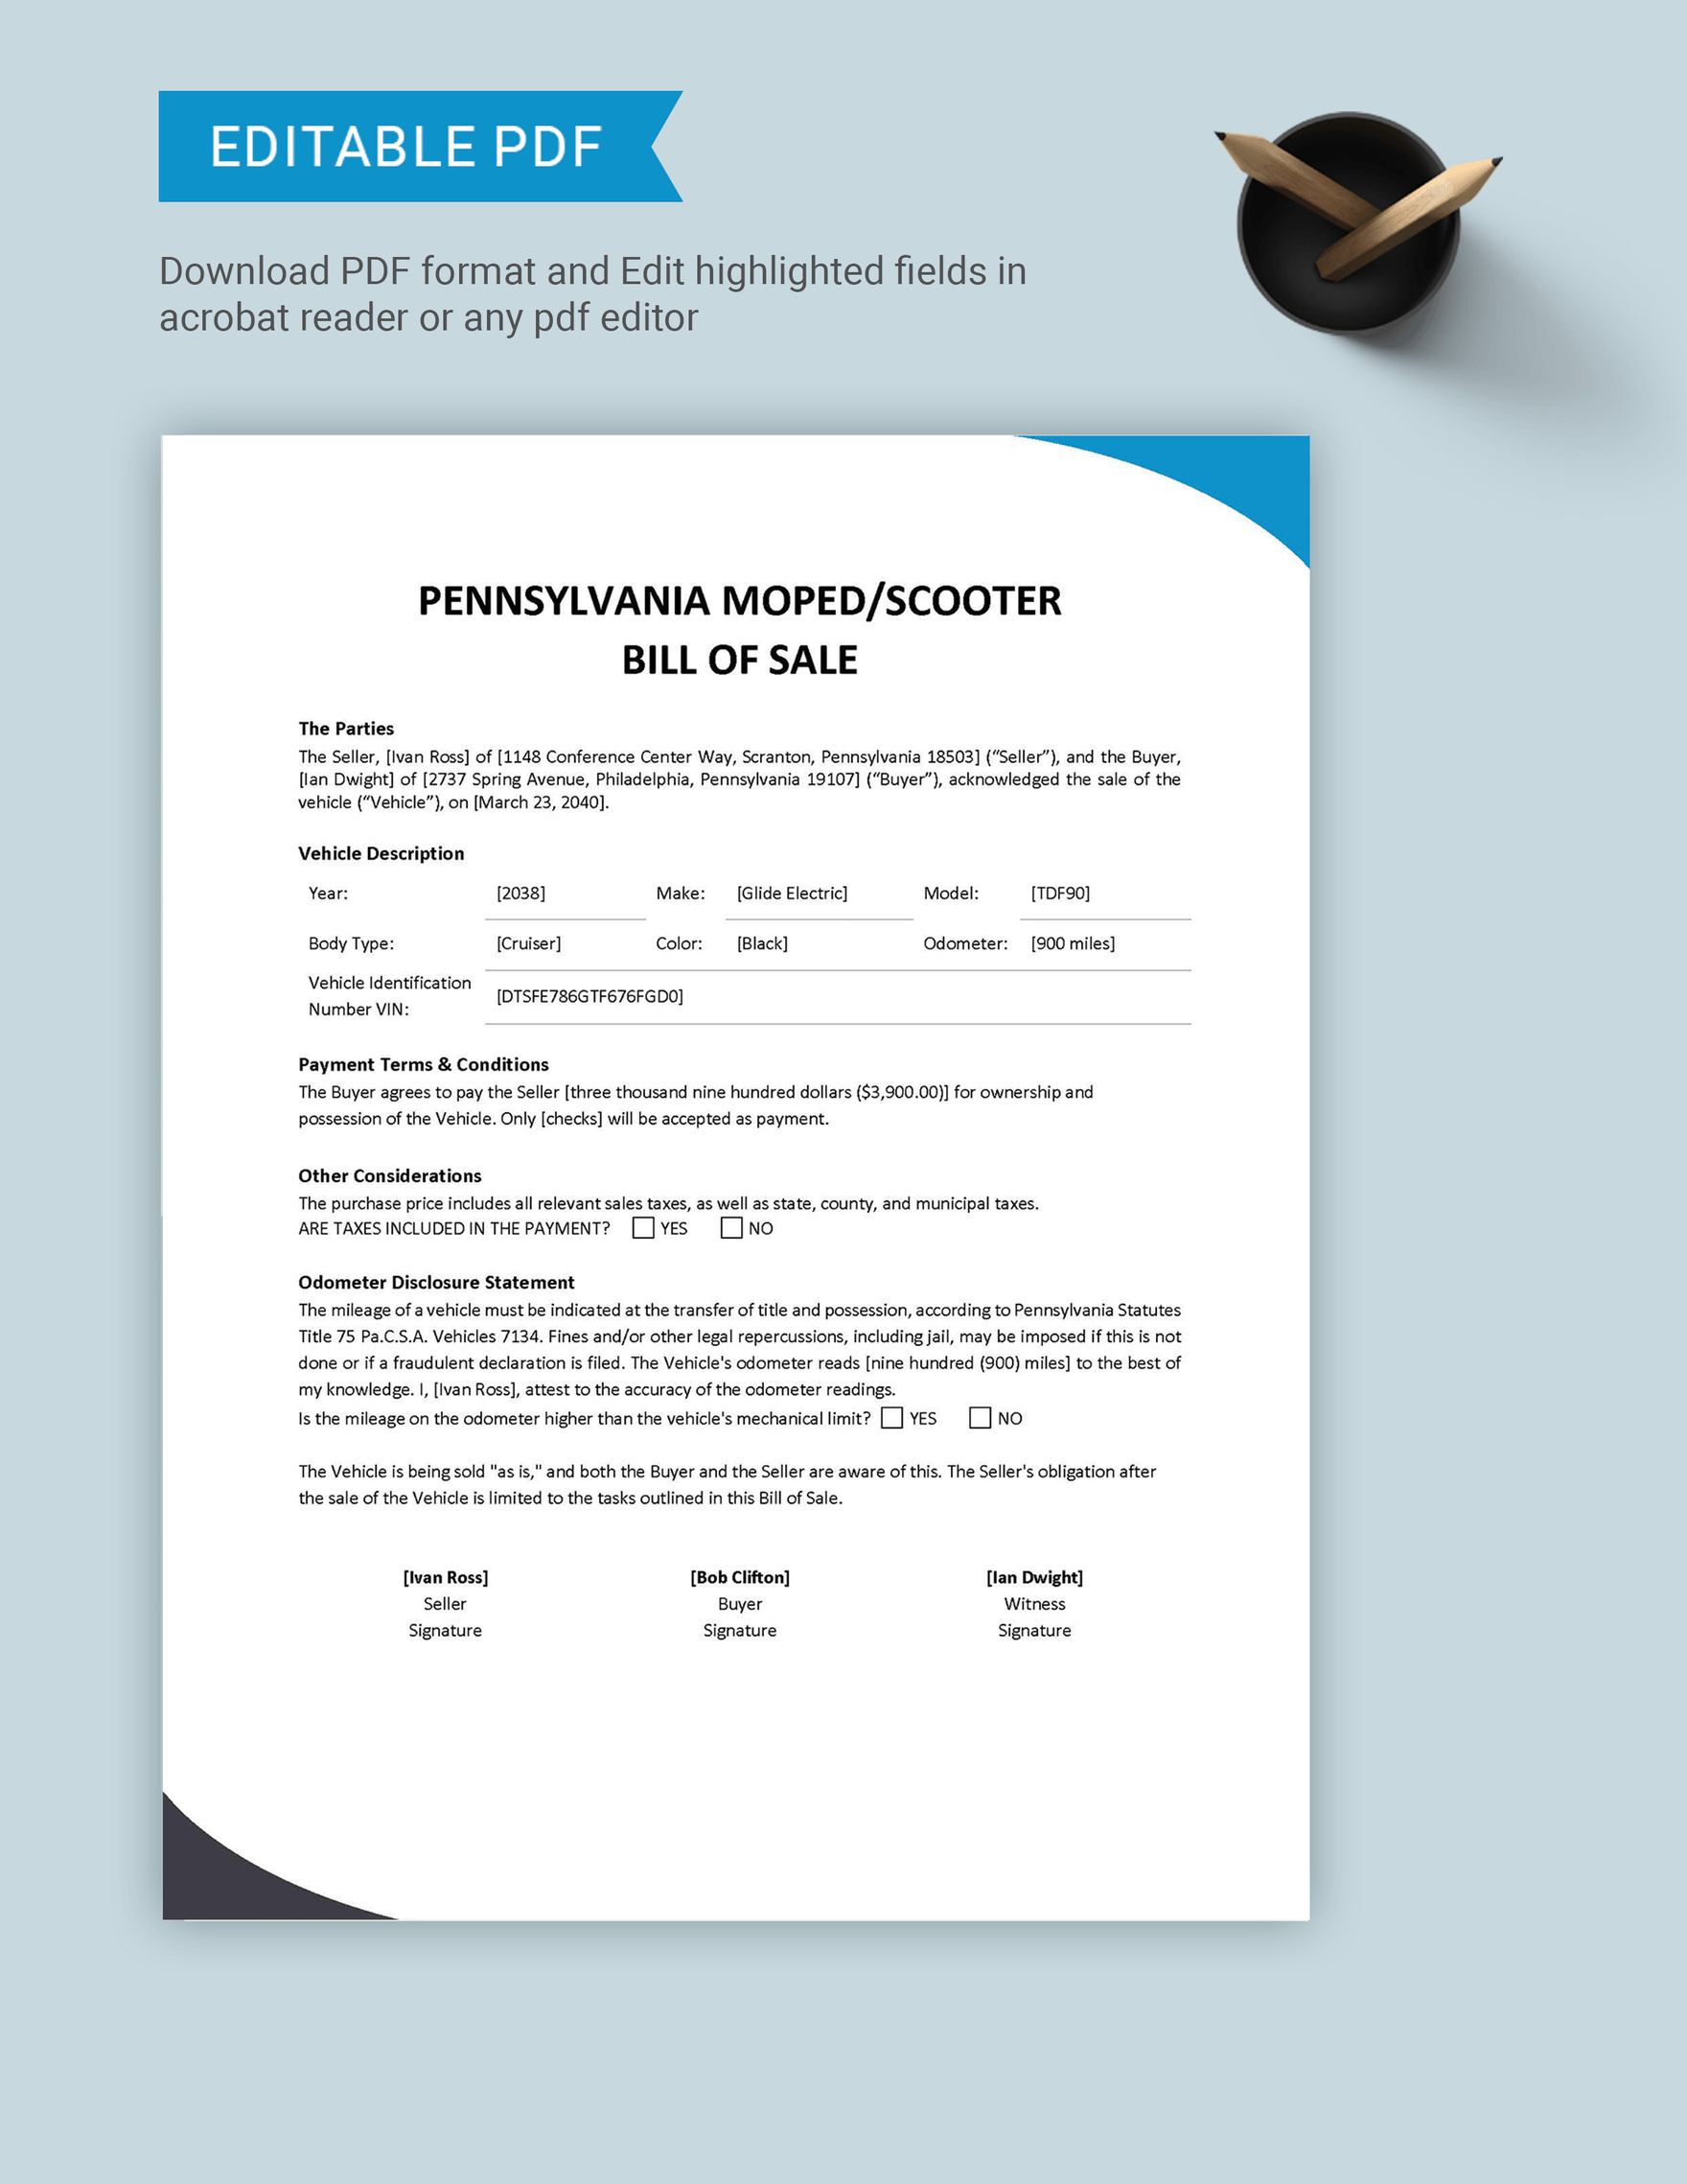 Pennsylvania Moped / Scooter Bill of Sale Template